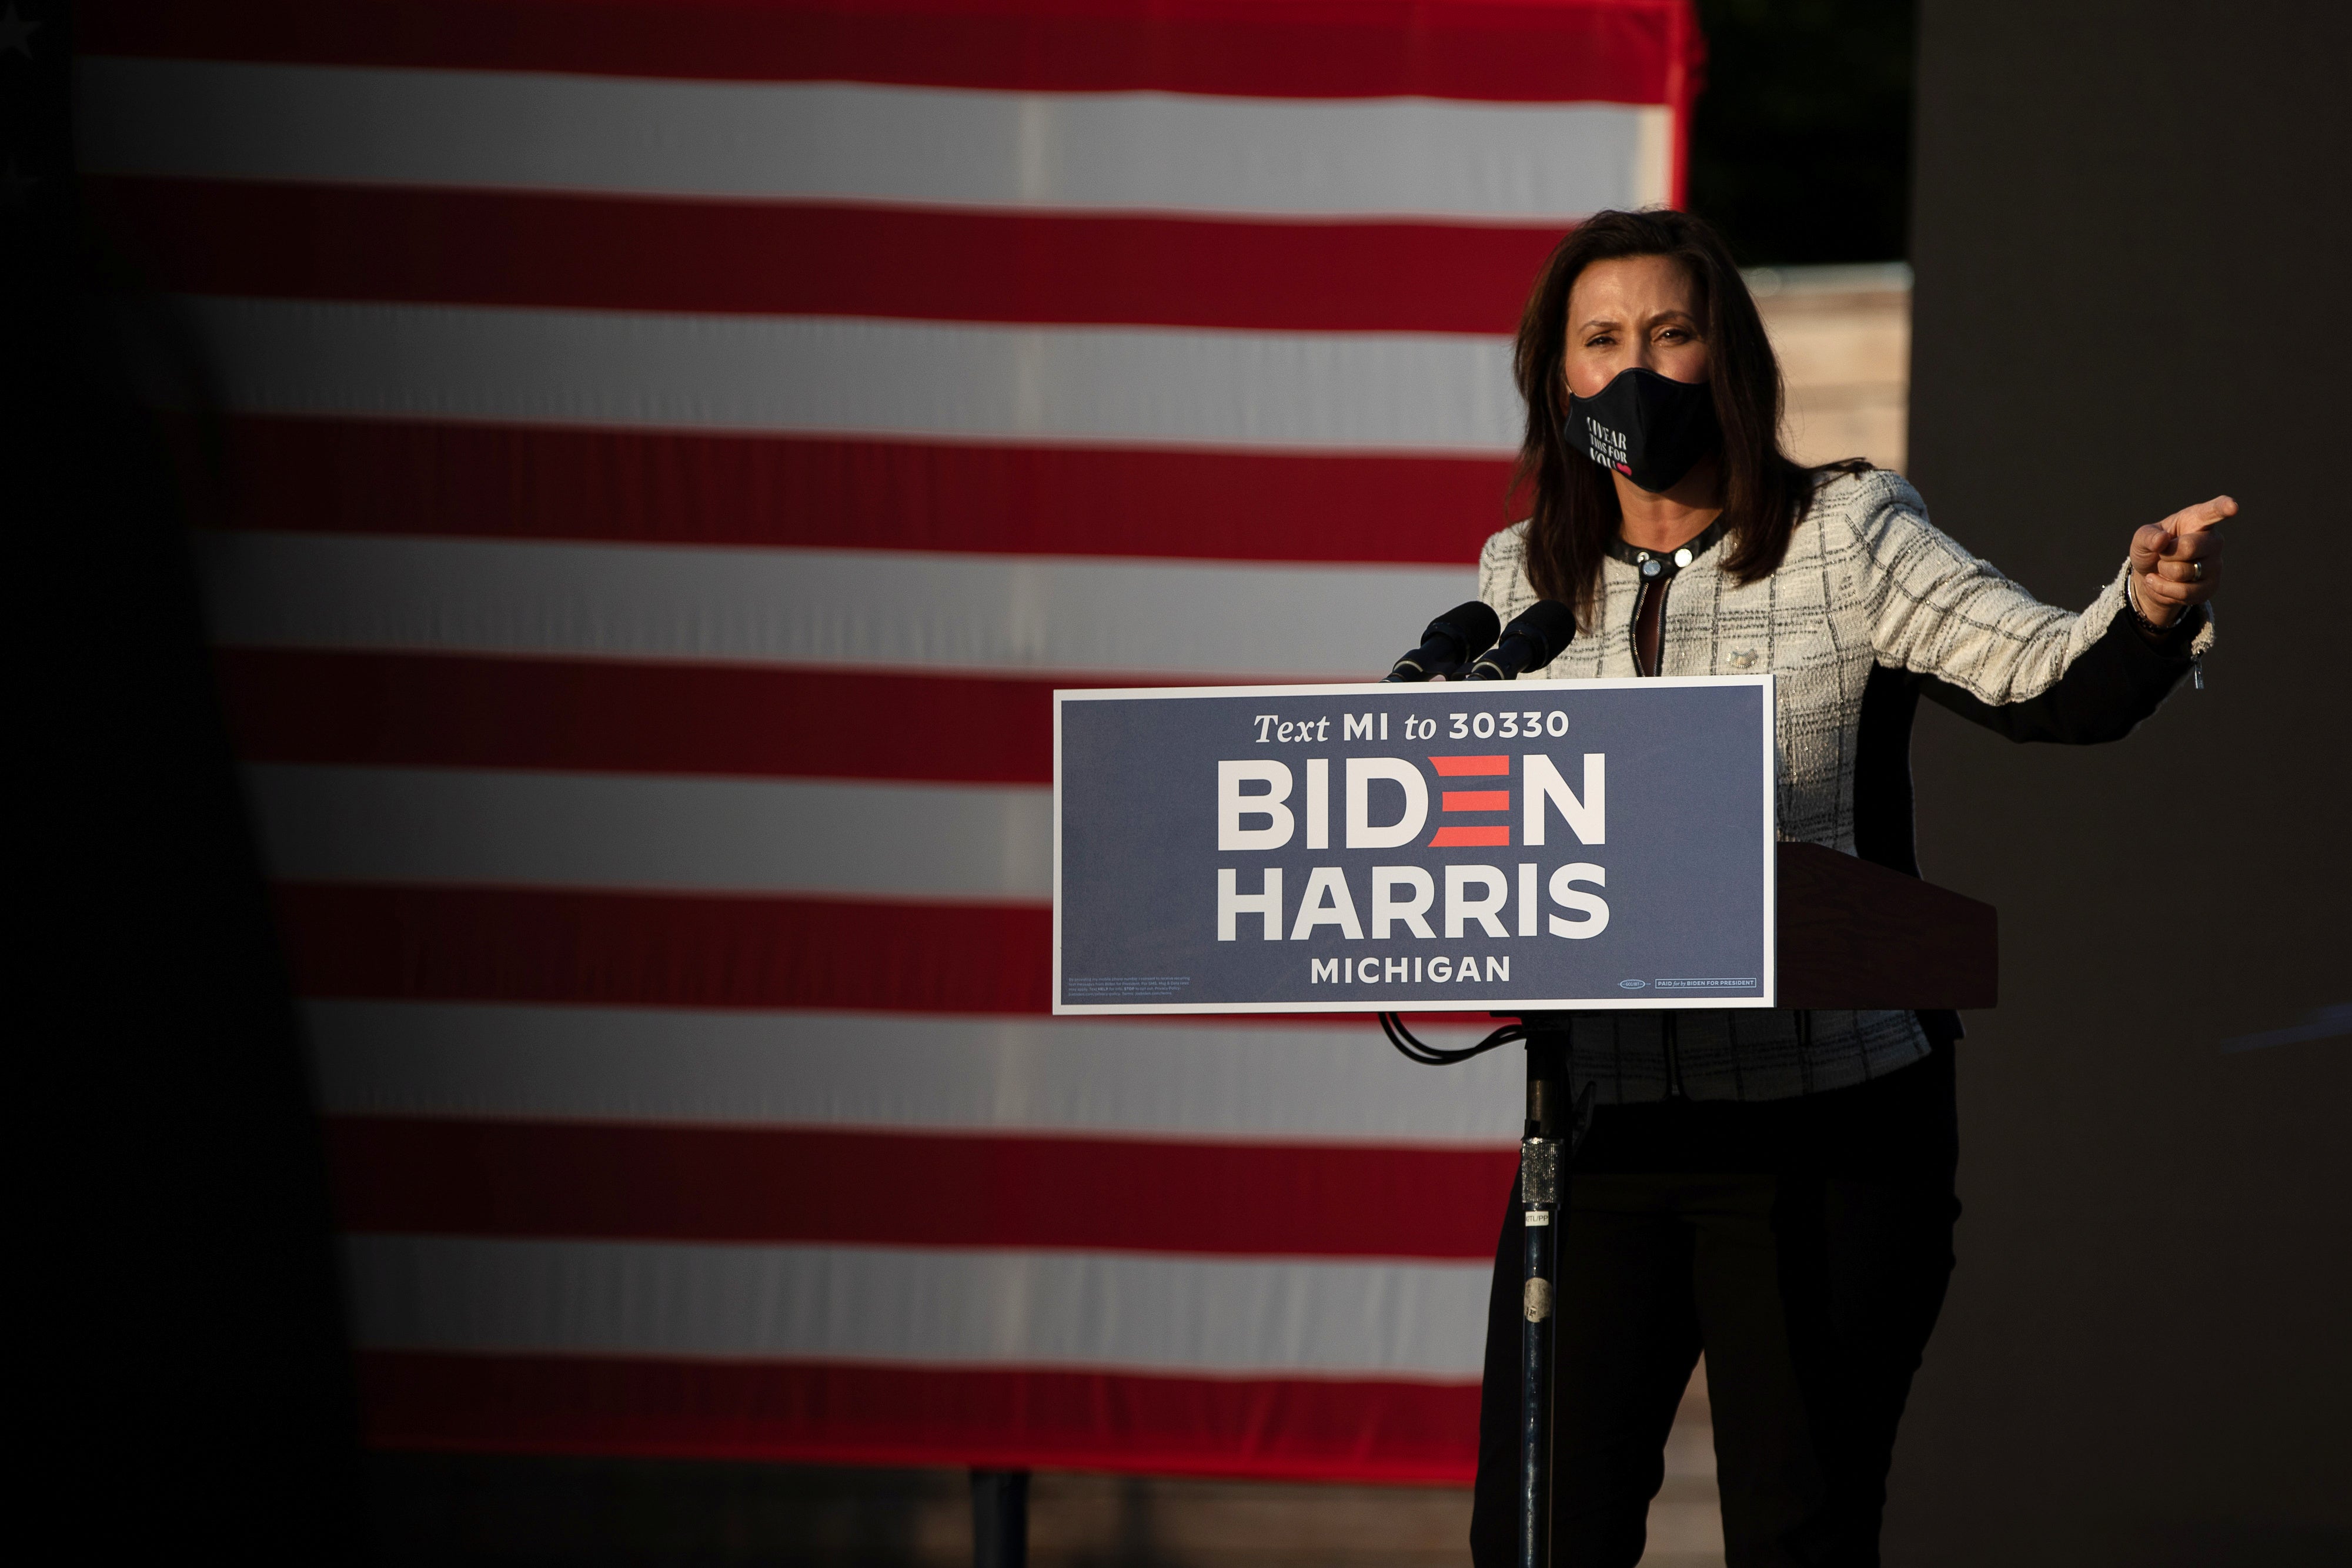 Michigan Governor Gretchen Whitmer speaks at a campaign event for Kamala Harris in Detroit, Michigan on 22 September